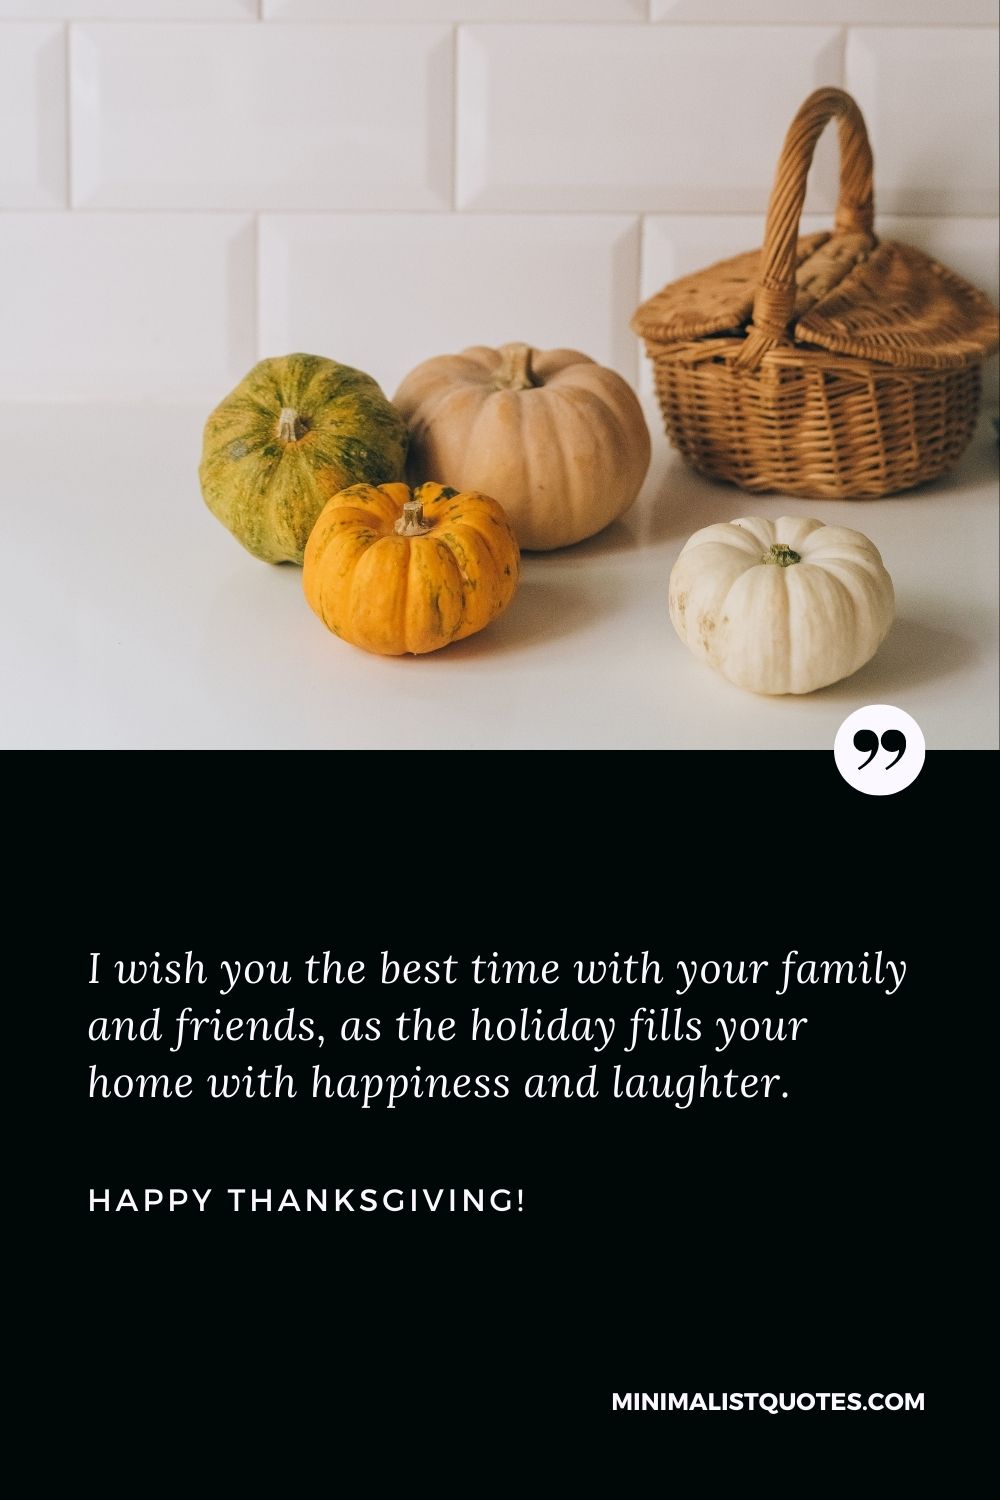 Thanksgiving sayings for cards: I wish you the best time with your family and friends, as the holiday fills your home with happiness and laughter. Happy Thanksgiving!